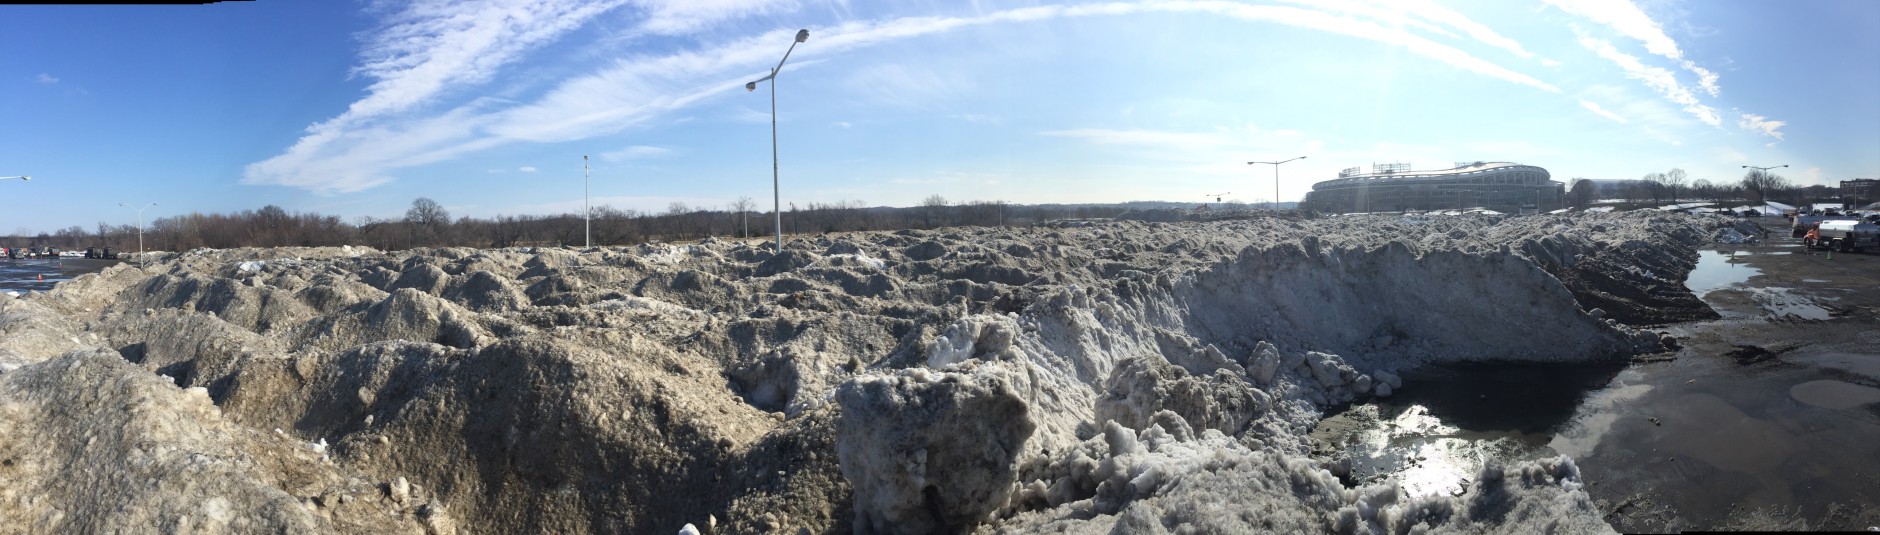 Snowpile seen in a parking lot at RFK Stadium on Jan. 27, 2016. (Courtesy Julia Robey Christian)